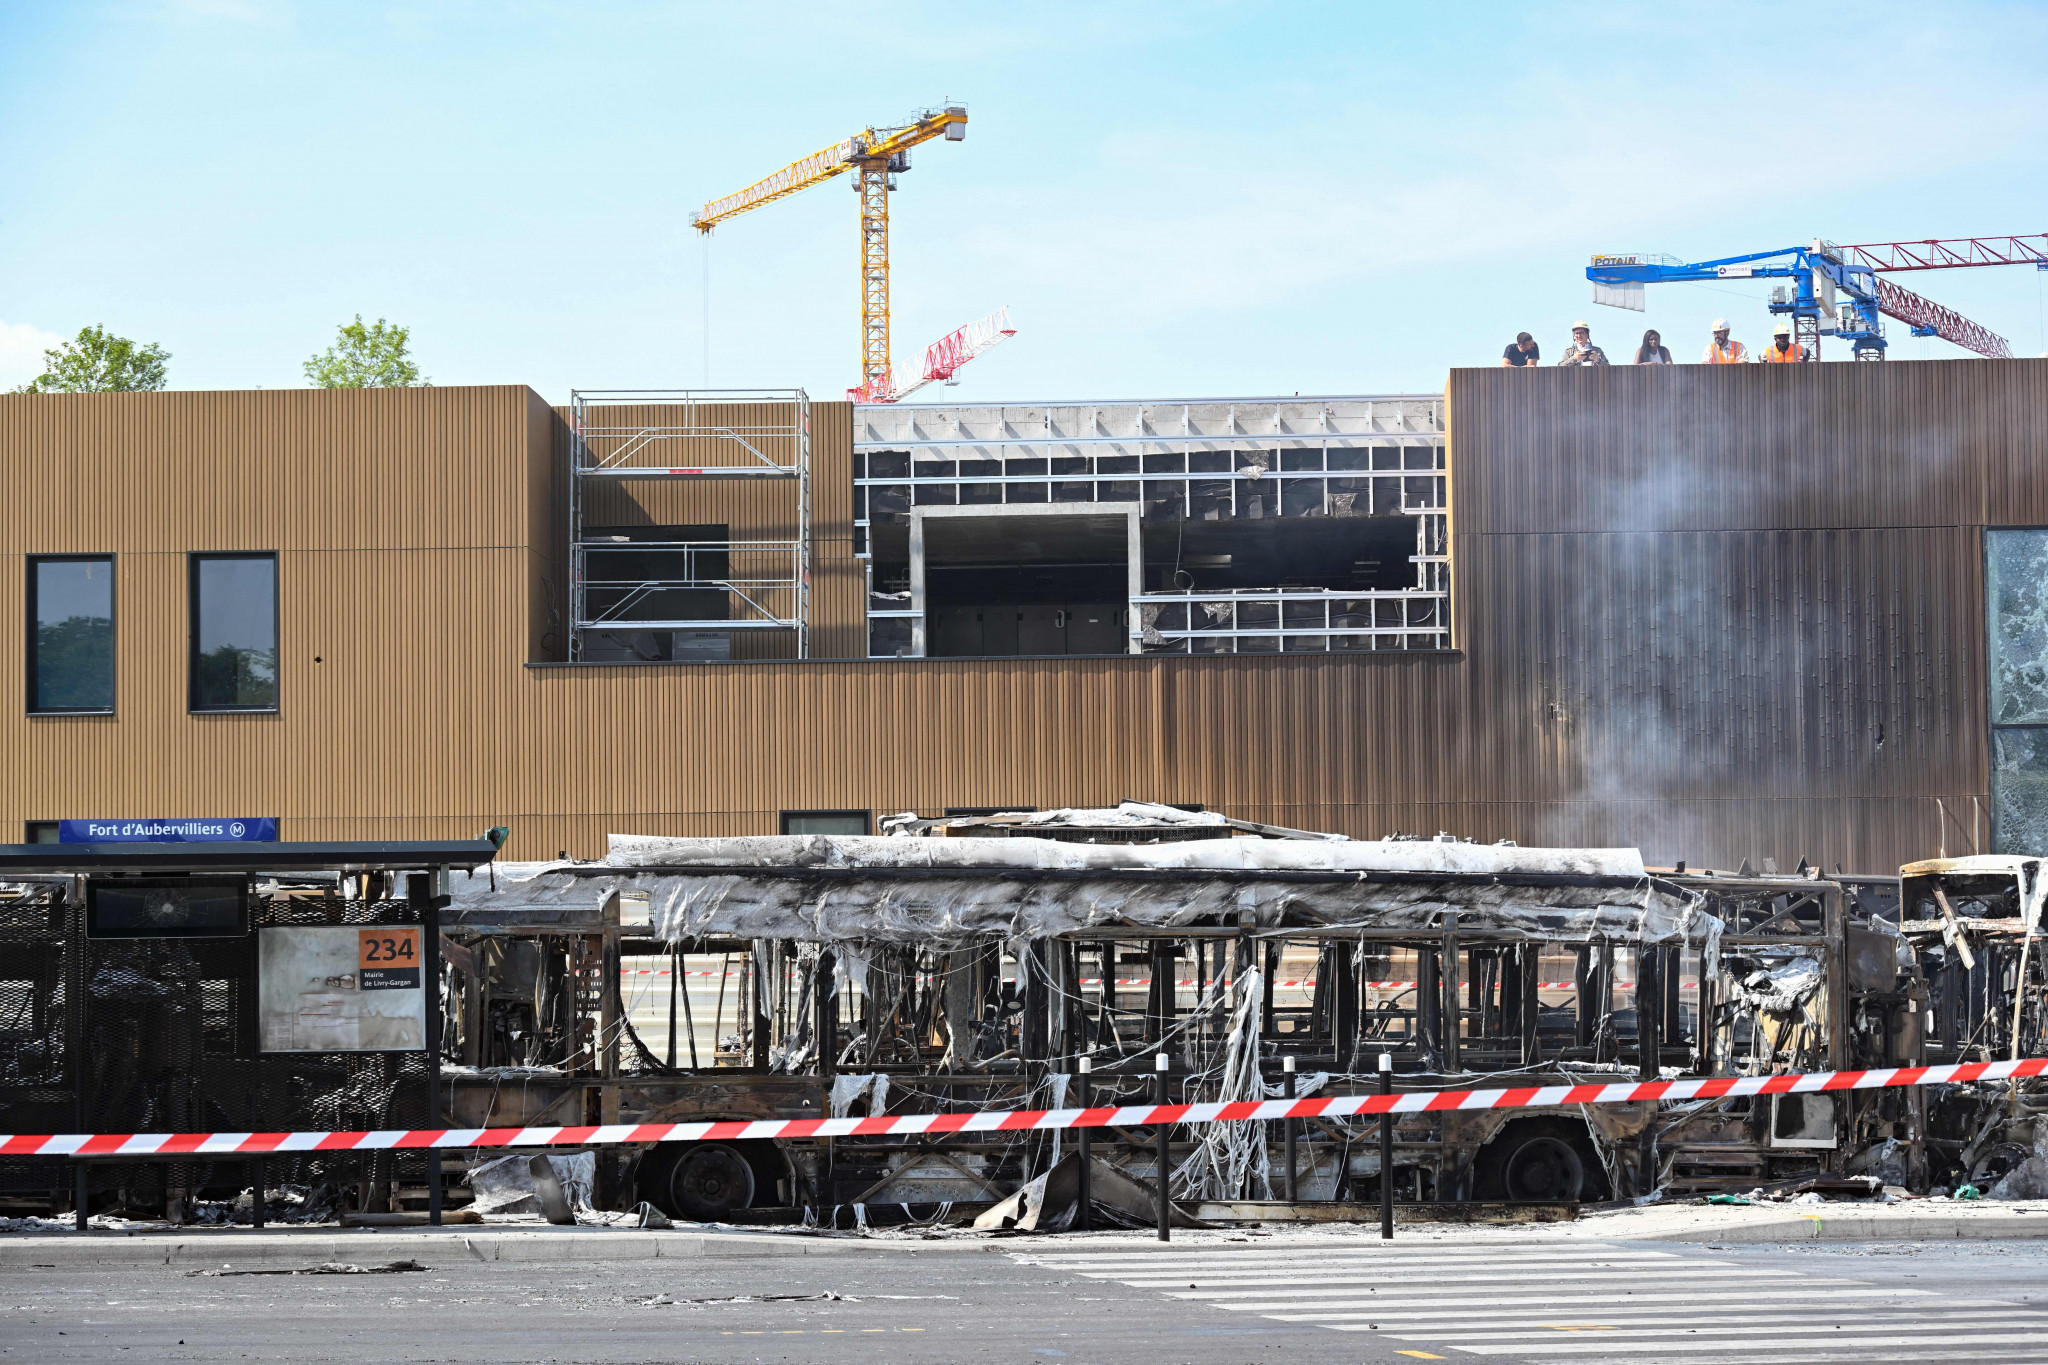 Paris 2024 training venue damaged during night of riots in France after killing of teenager